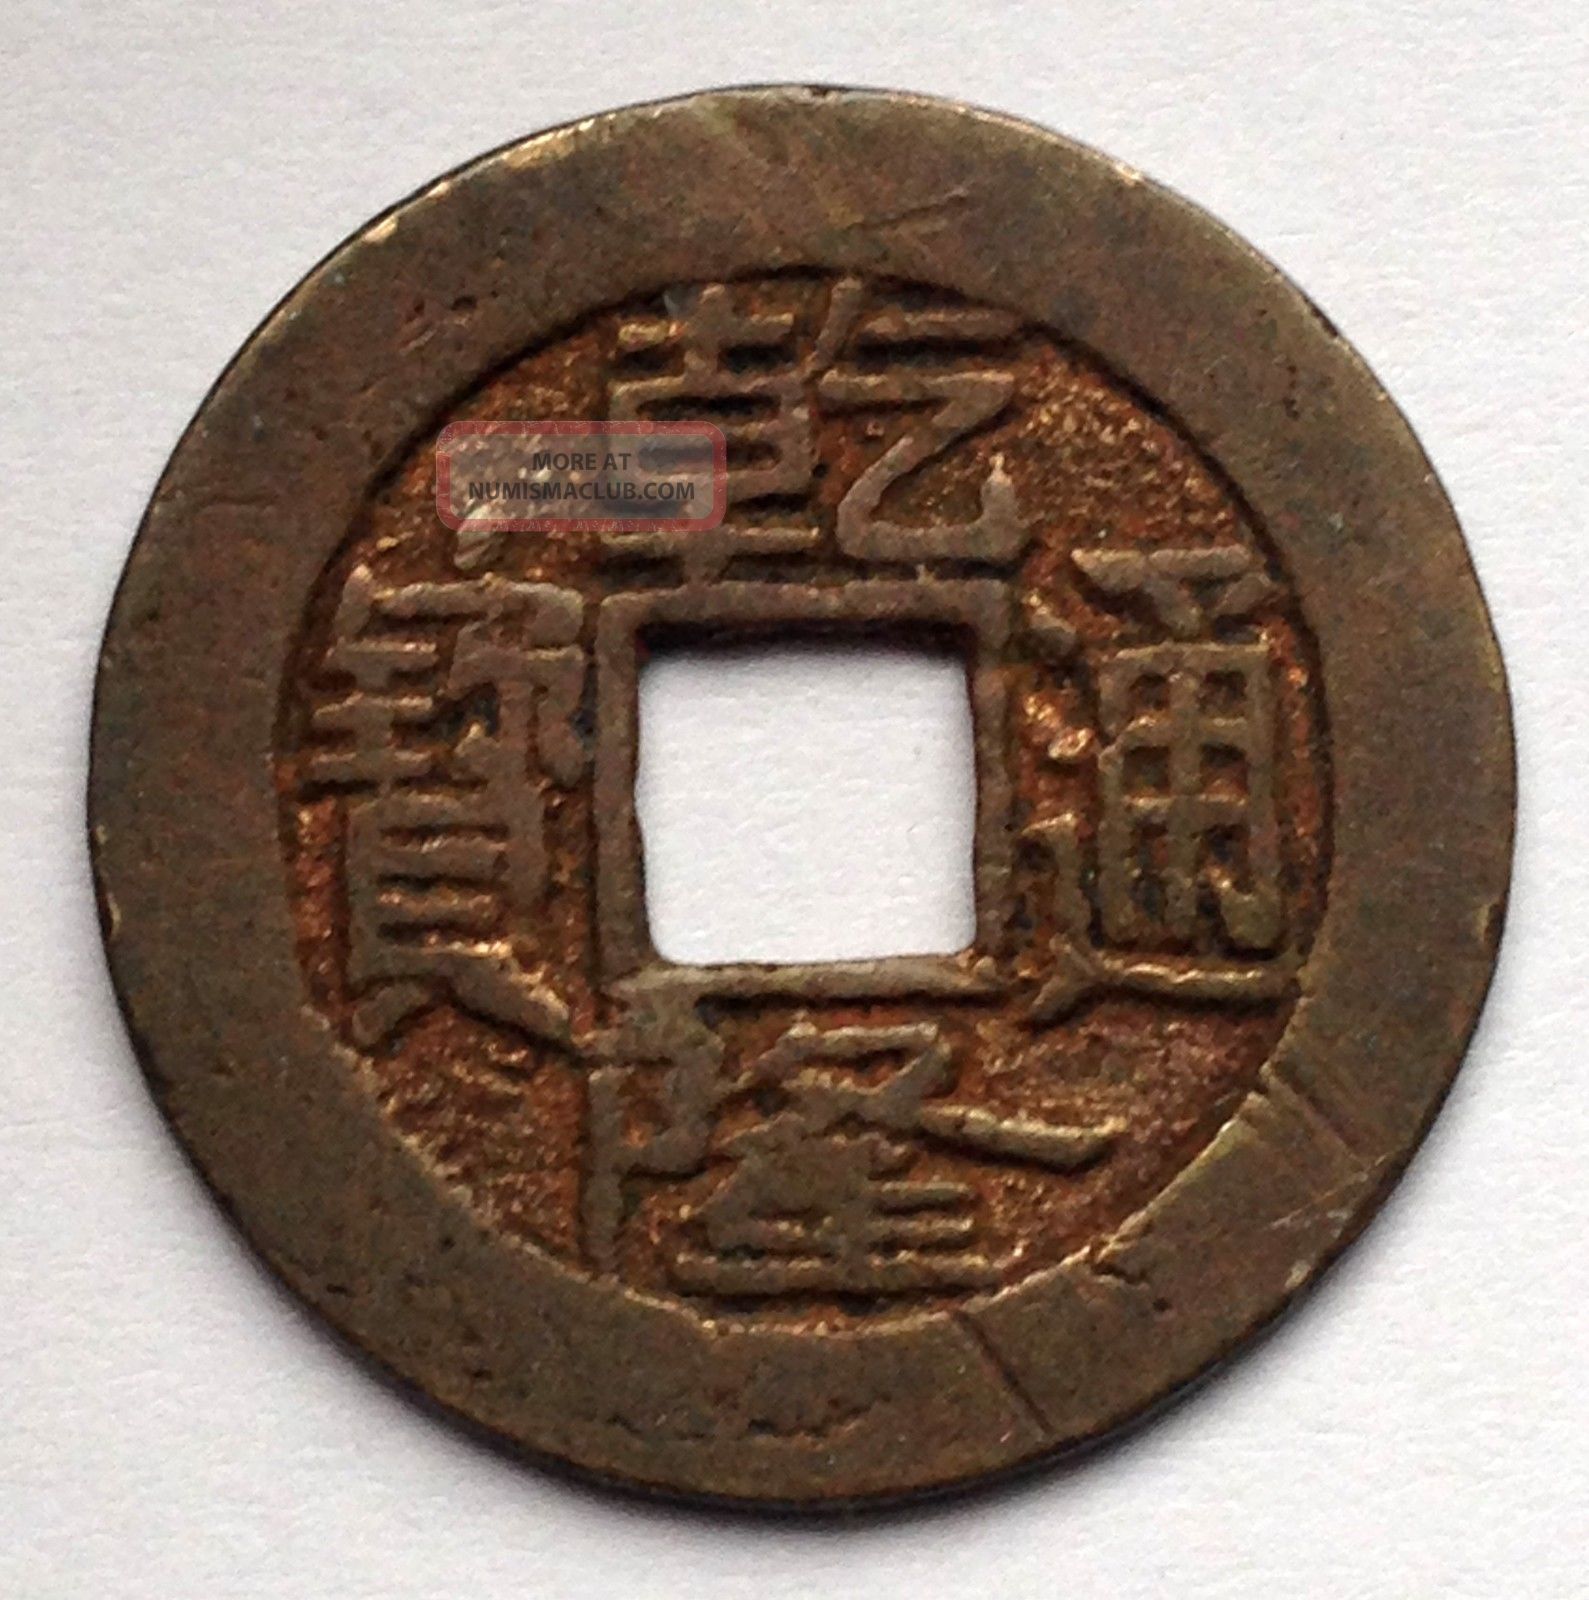 Albums 97+ Pictures Old Chinese Coins With Square Hole Value Excellent